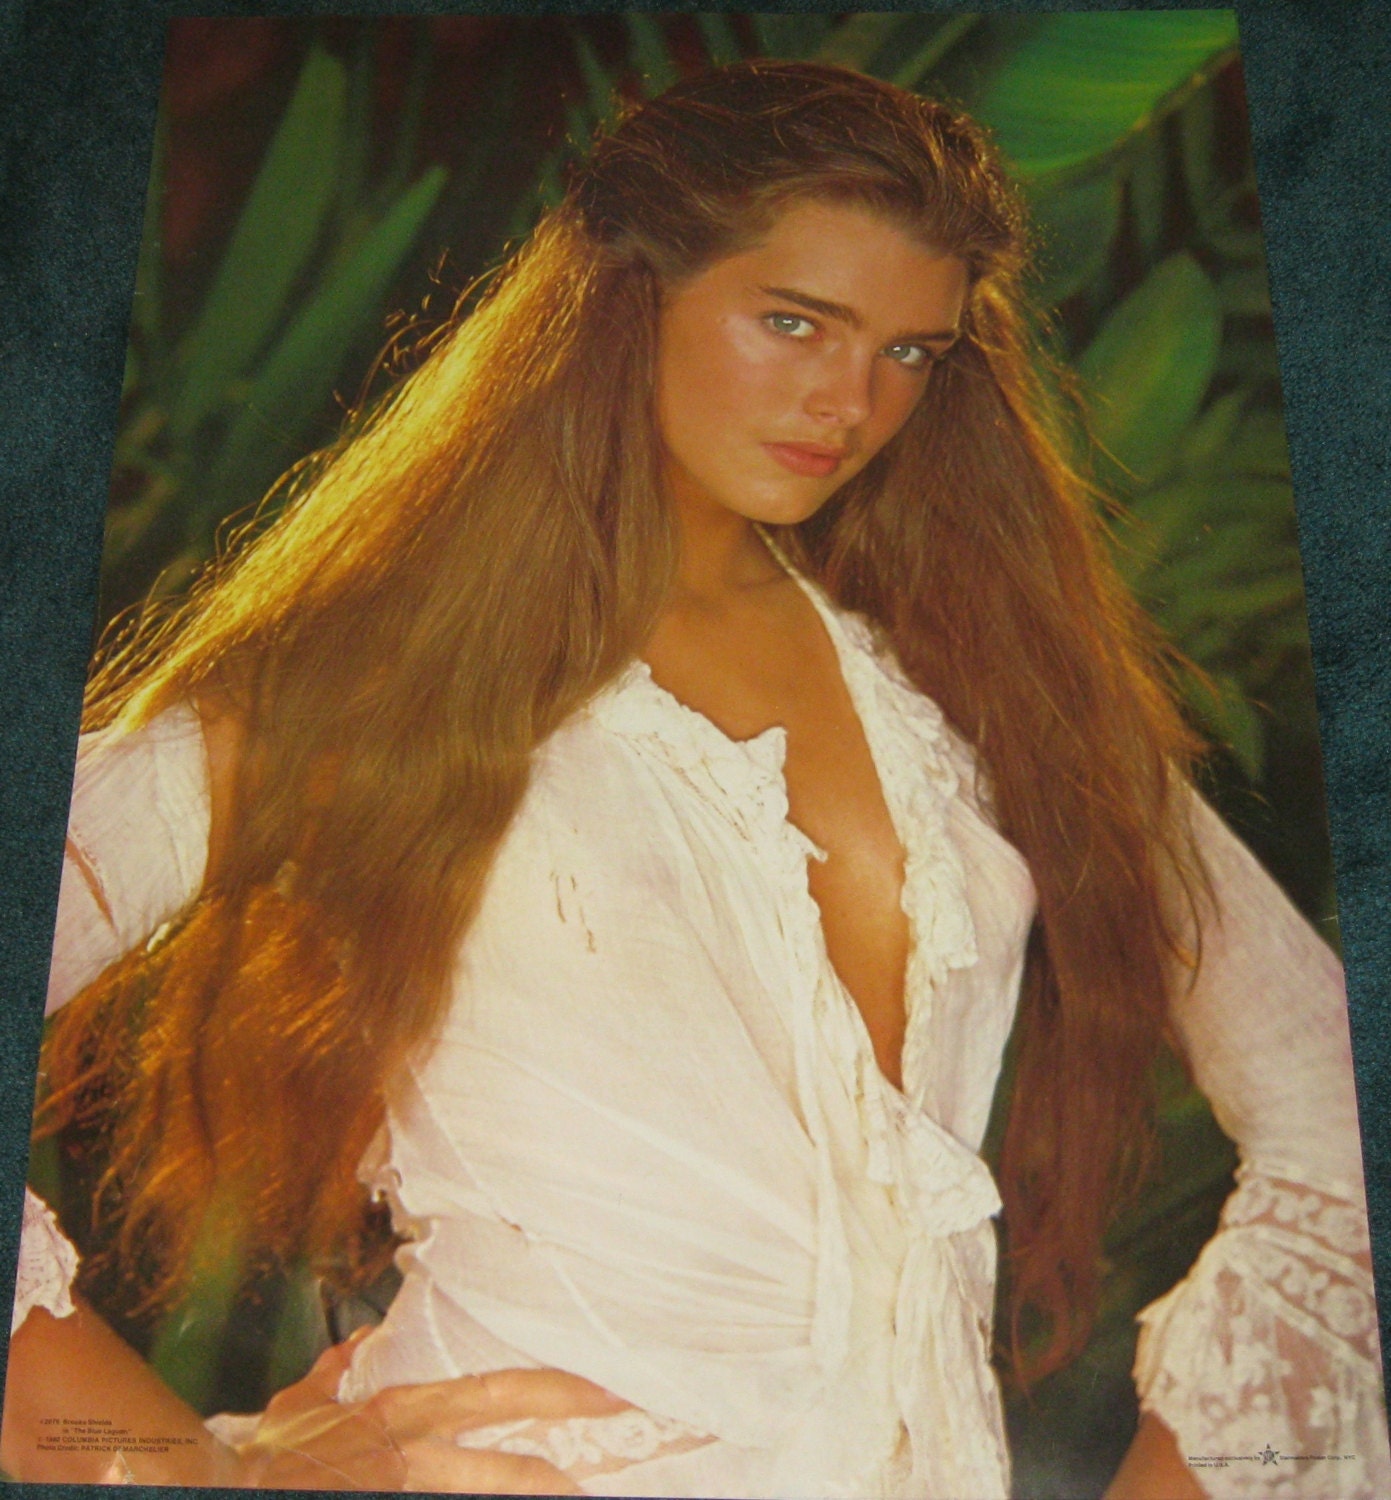 Lagoon Brooke Shields Body Related Keywords & Suggestions - 